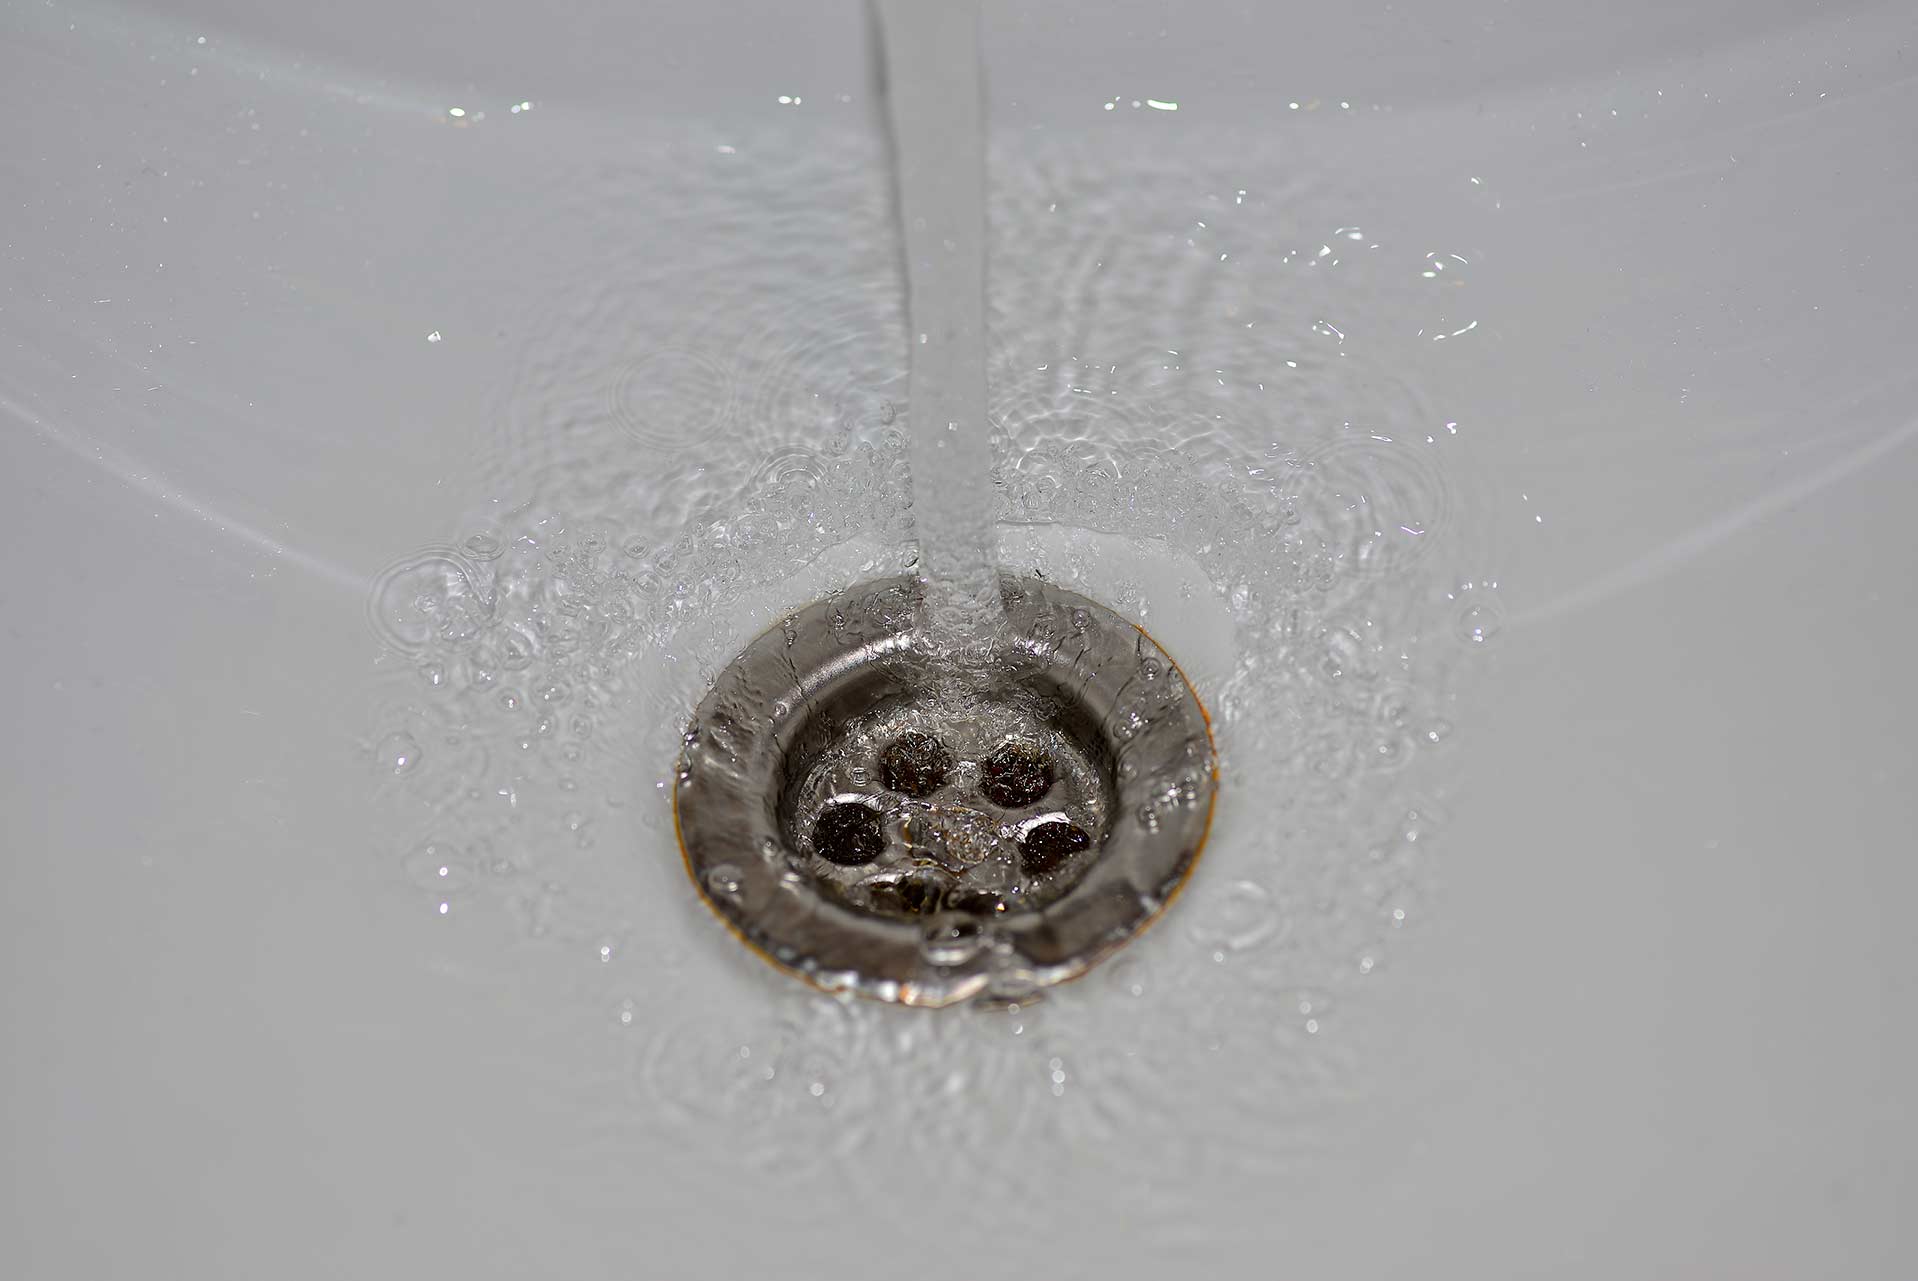 A2B Drains provides services to unblock blocked sinks and drains for properties in Nantwich.